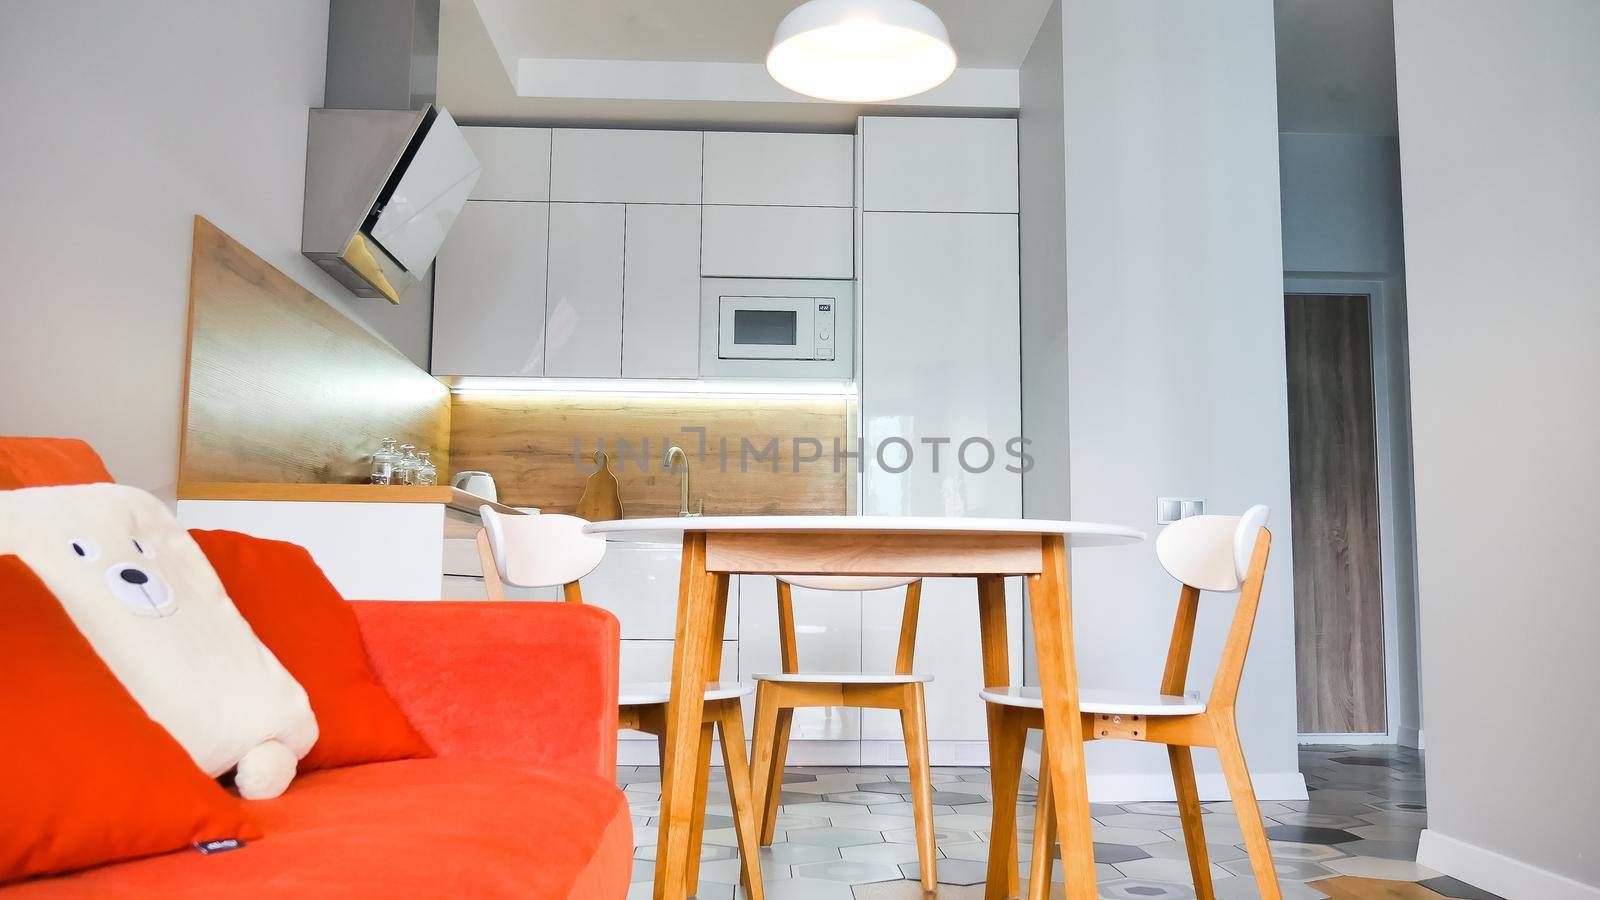 Modern kitchen interior with wooden and white elements, bright orange sofa, domestic life, home showcase interior concept. by balinska_lv